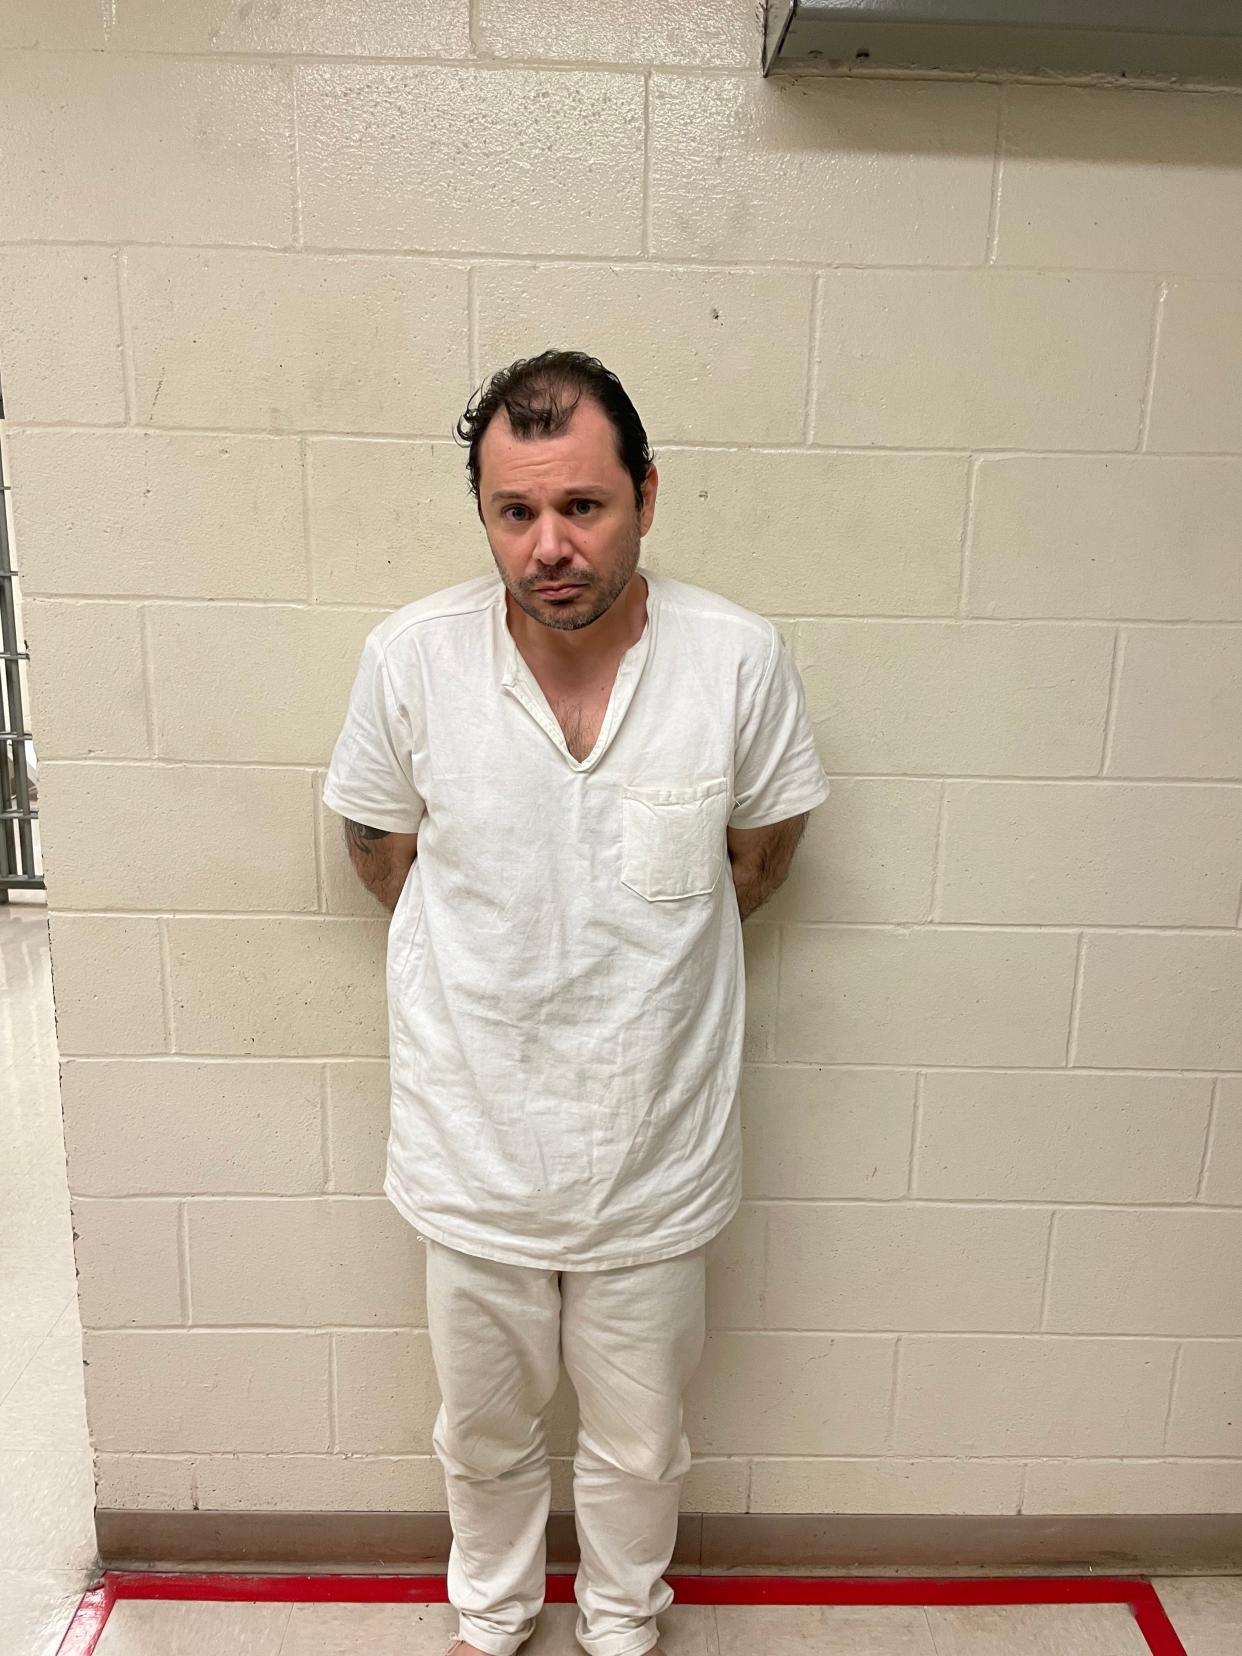 Officials say 39 year-old Robert Yancy Jr. was captured Monday near Victoria after escaping from the Clements Unit Sunday in Brazoria County. (Photo courtesy of TDJC)